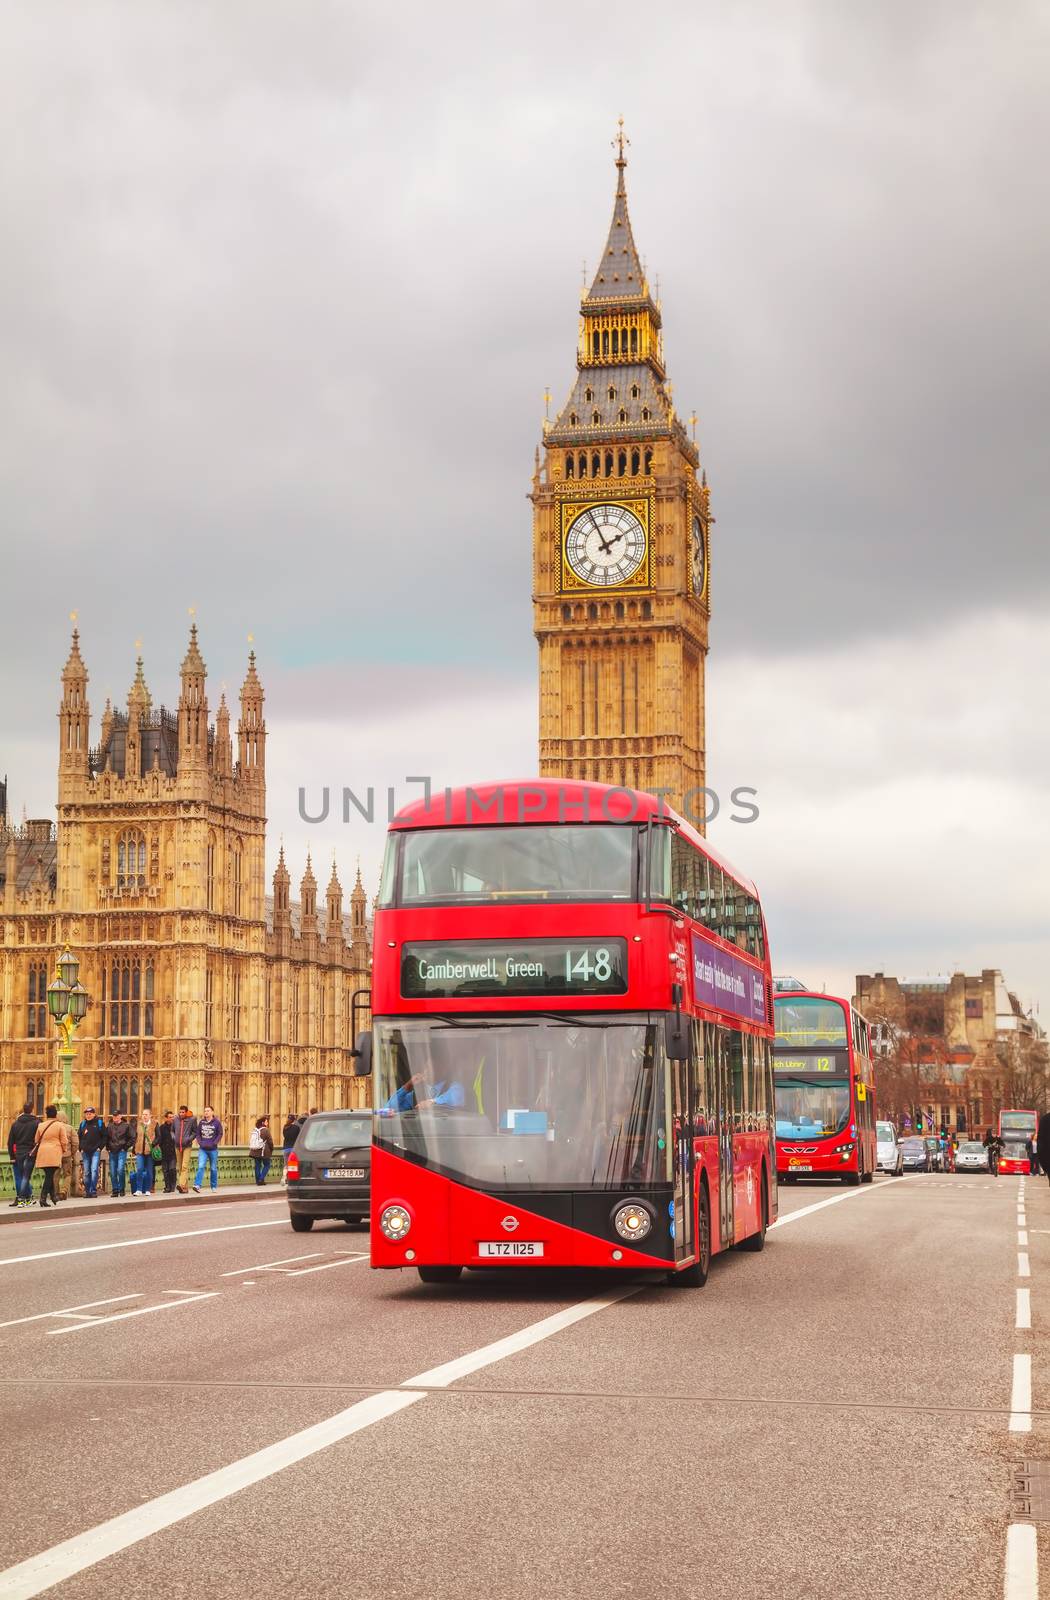 LONDON - APRIL 4: Iconic red double decker bus on April 4, 2015 in London, UK. The London Bus is one of London's principal icons, the archetypal red rear-entrance Routemaster recognised worldwide.